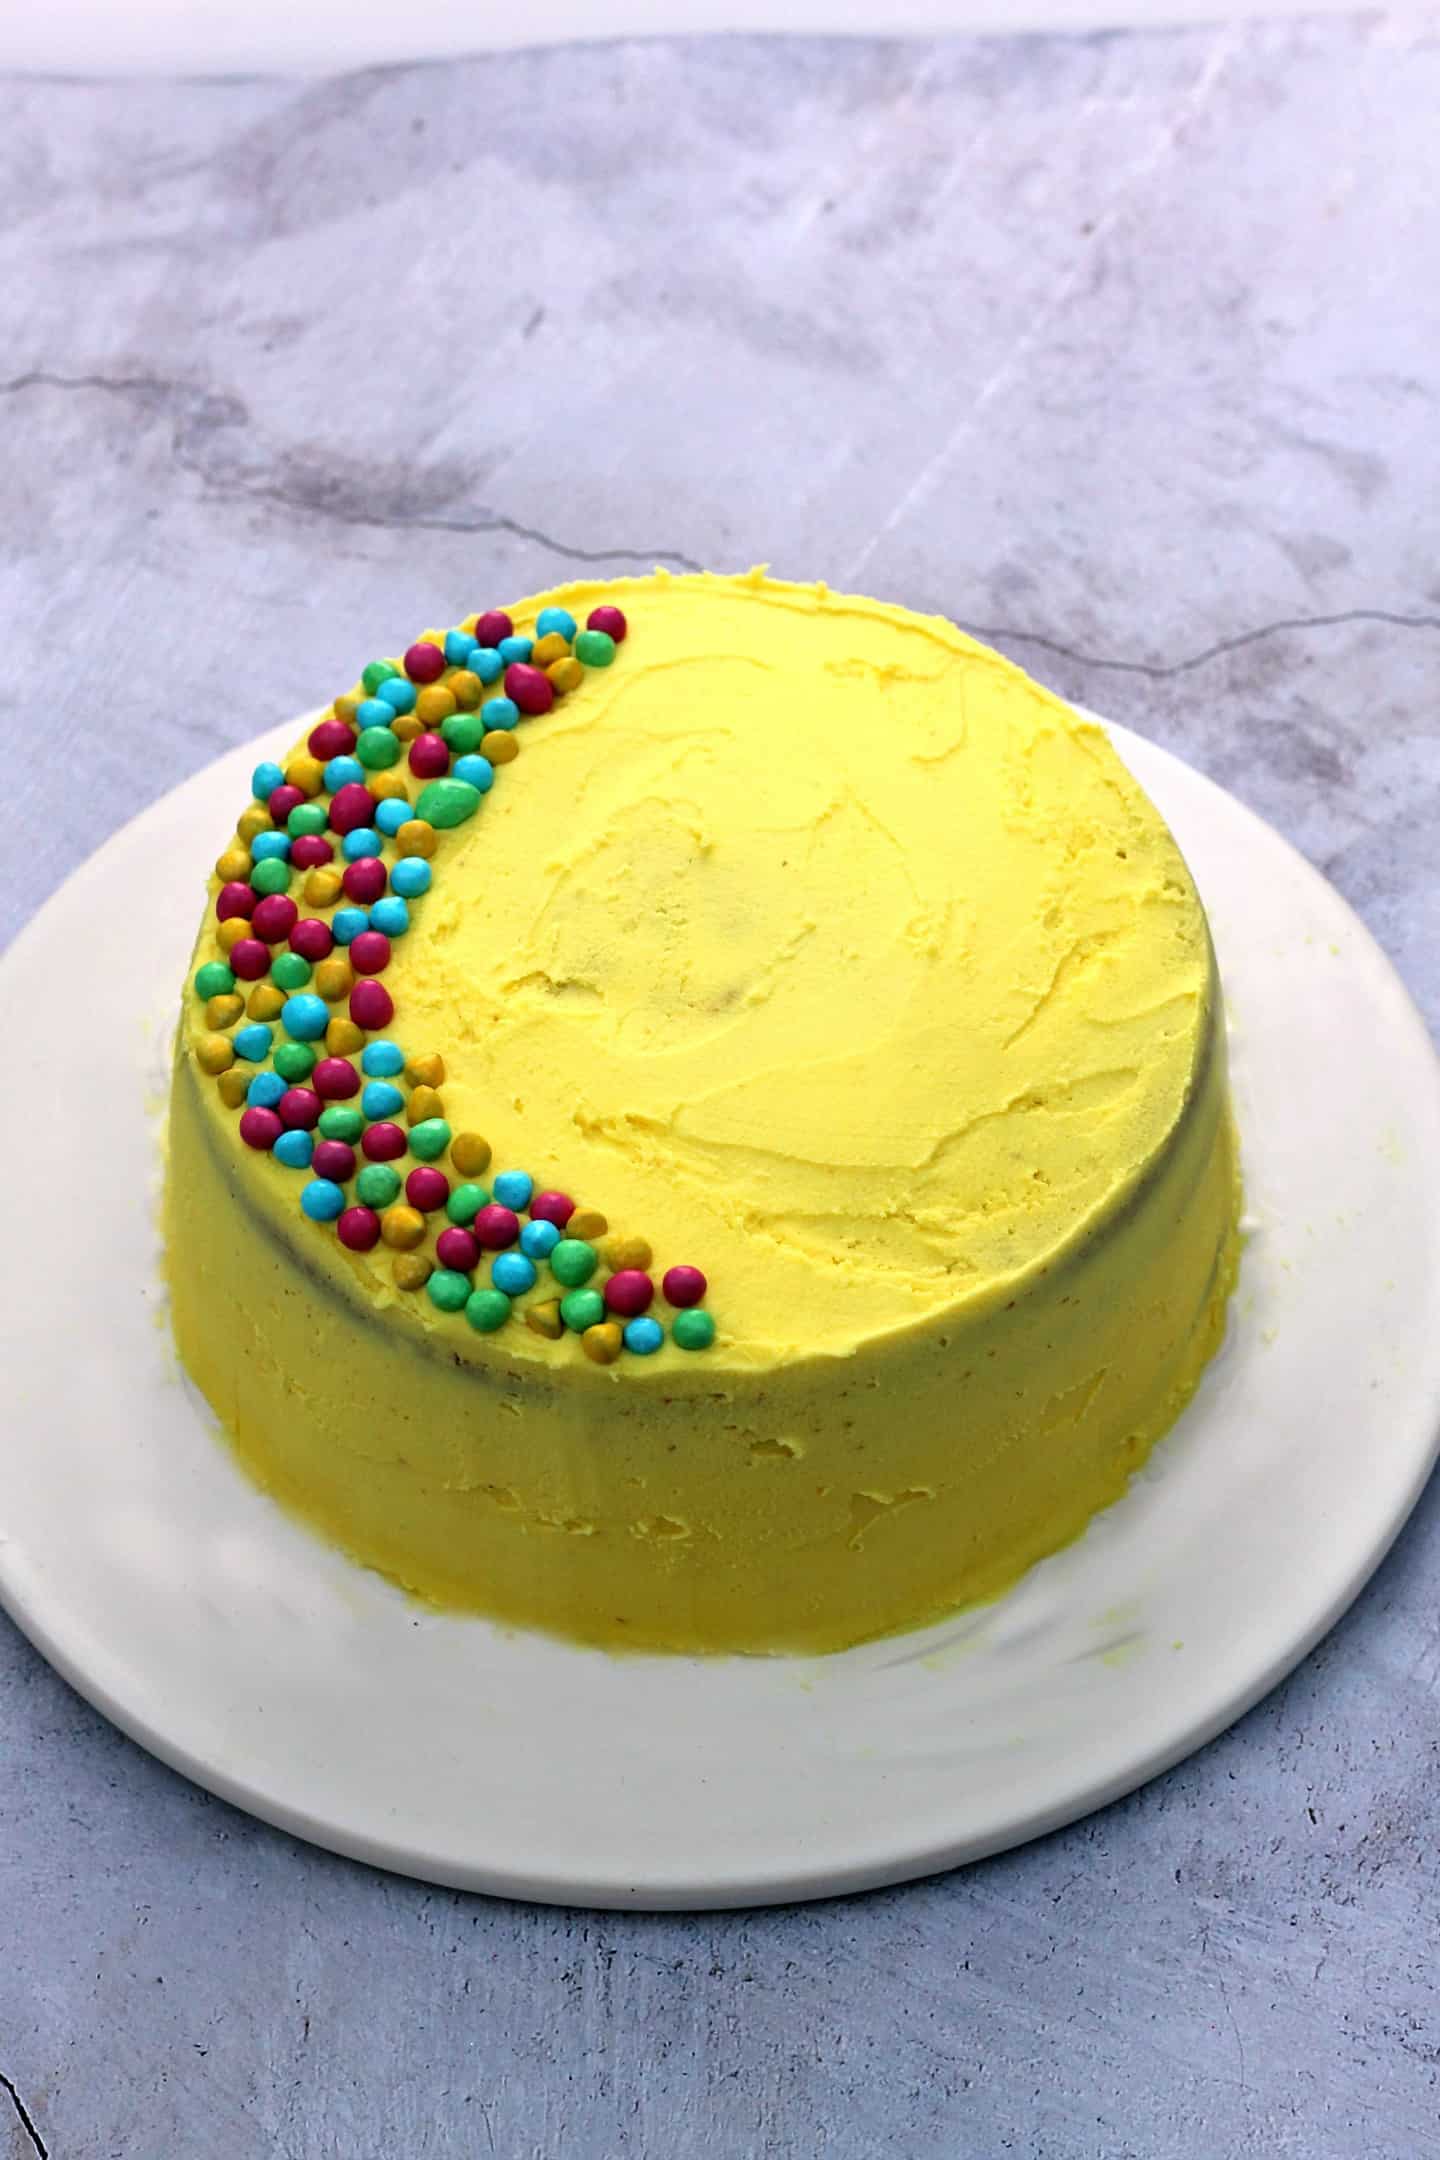 View of a yellow birthday cake with sprinkles on a white plate.